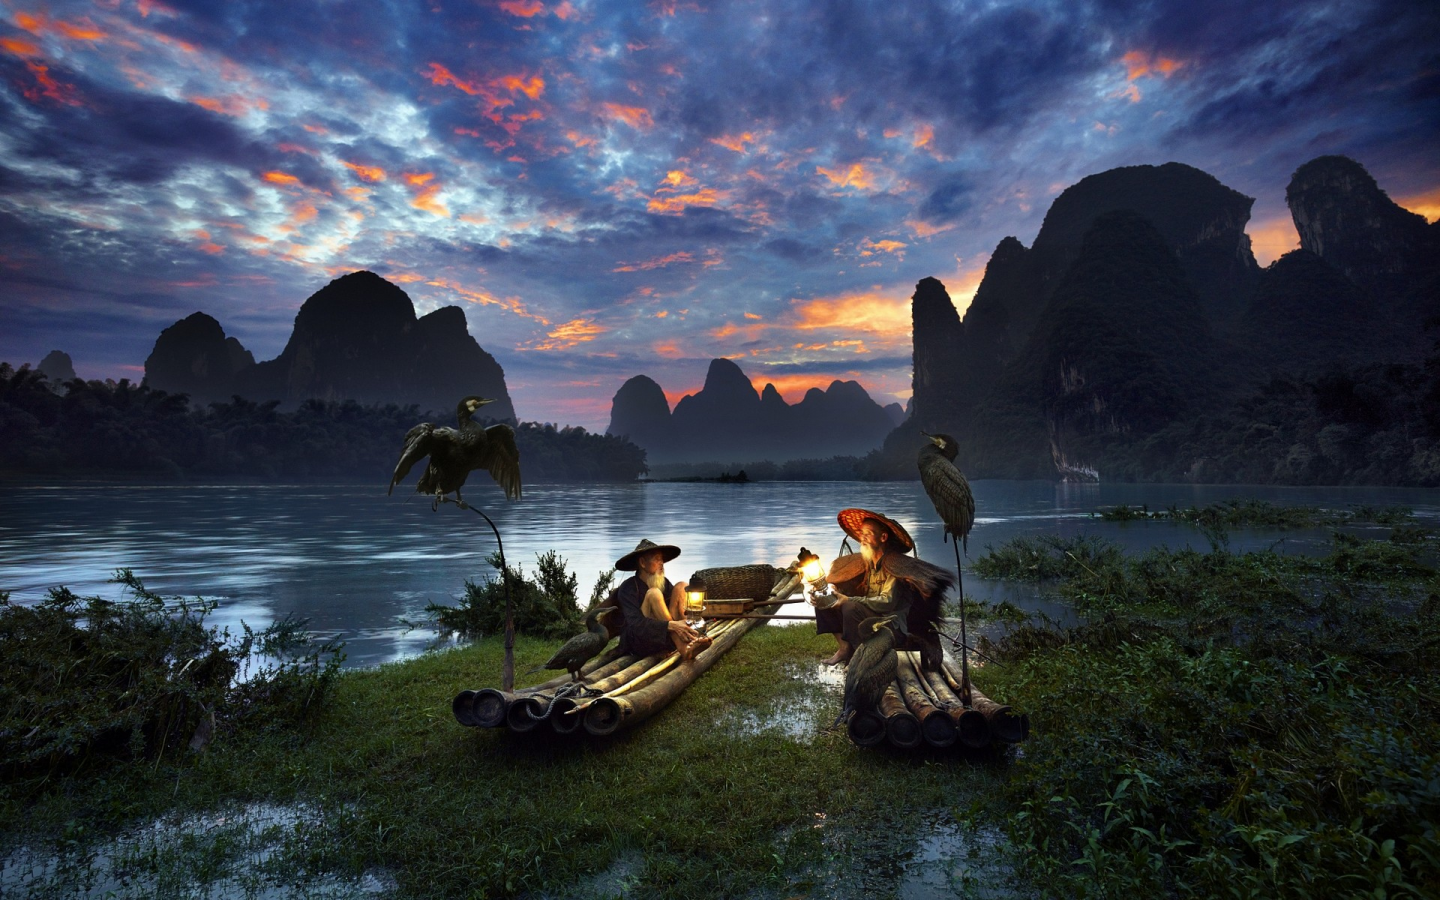 Download 1440x900 guilin, men, fisher, china, landscape, nature, mountain, sky, river, clouds, boat, bird Wallpaper